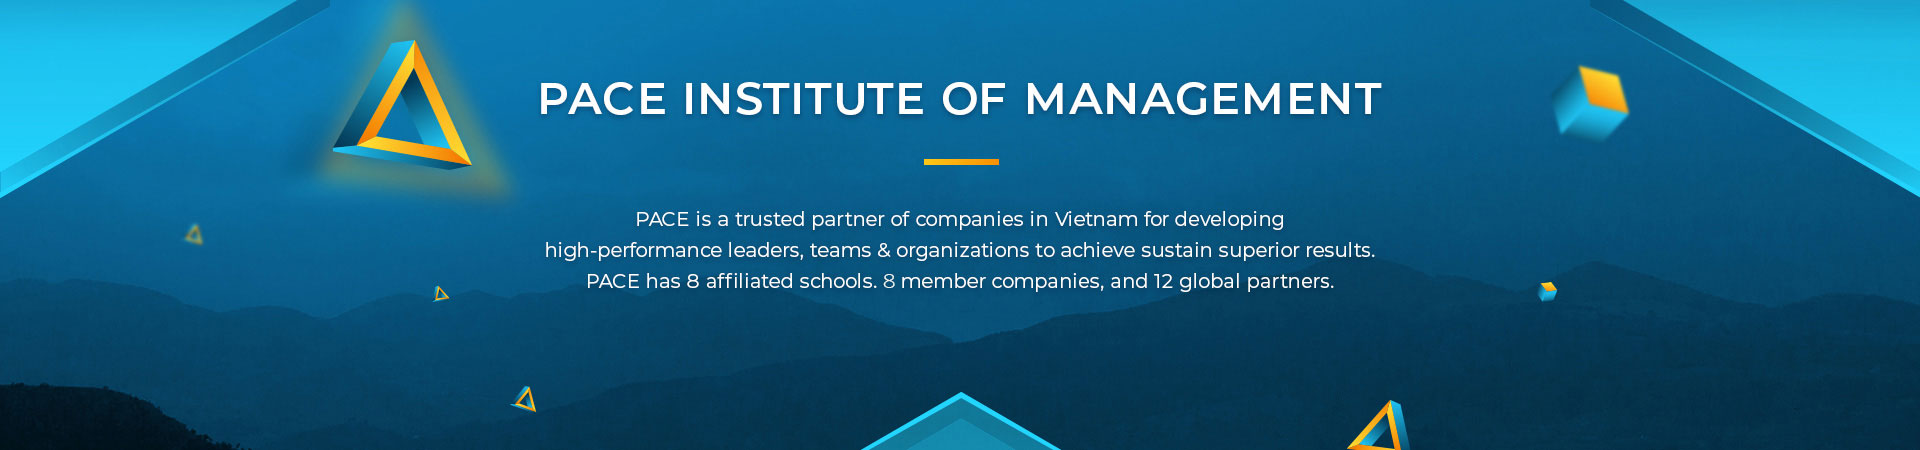 PACE’S 20-YEAR MILESTONES: A 2-DECADE JOURNEY OF DEVELOPING LEADERS & PROFESSIONALS FOR BUSINESS & SOCIETY IN VIETNAM